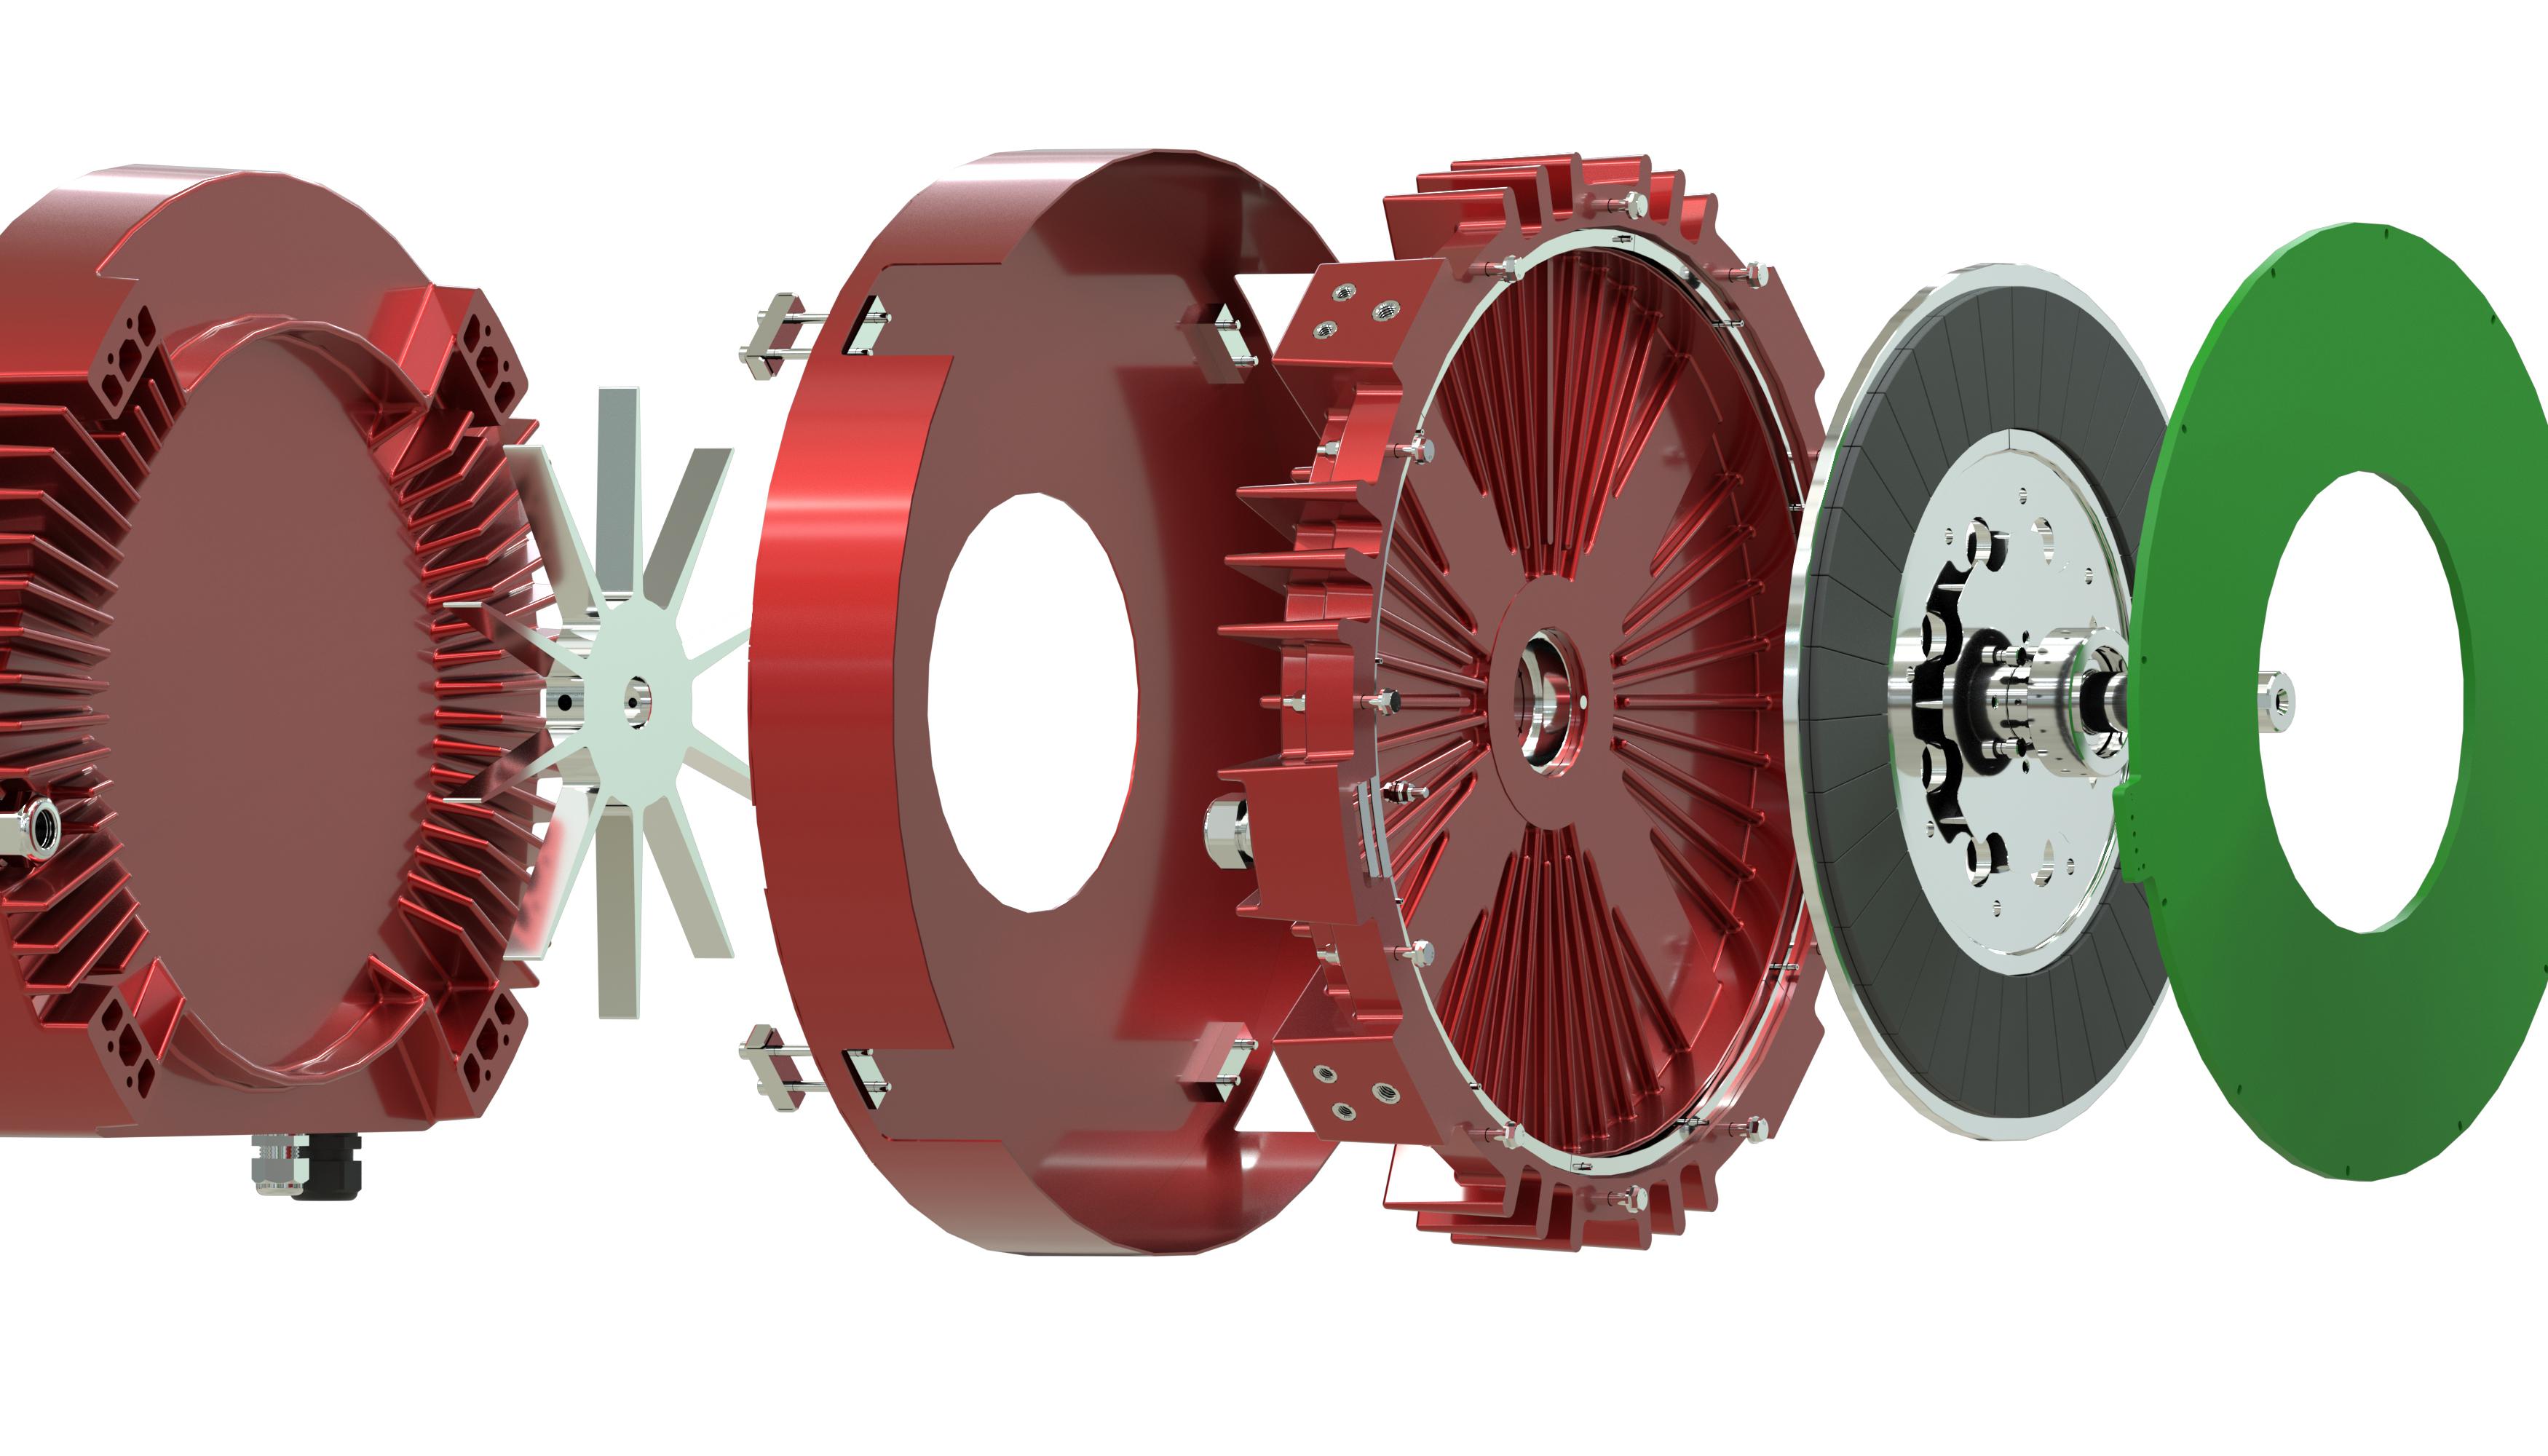 Electric Motors: Types, Applications, Construction, and Benefits